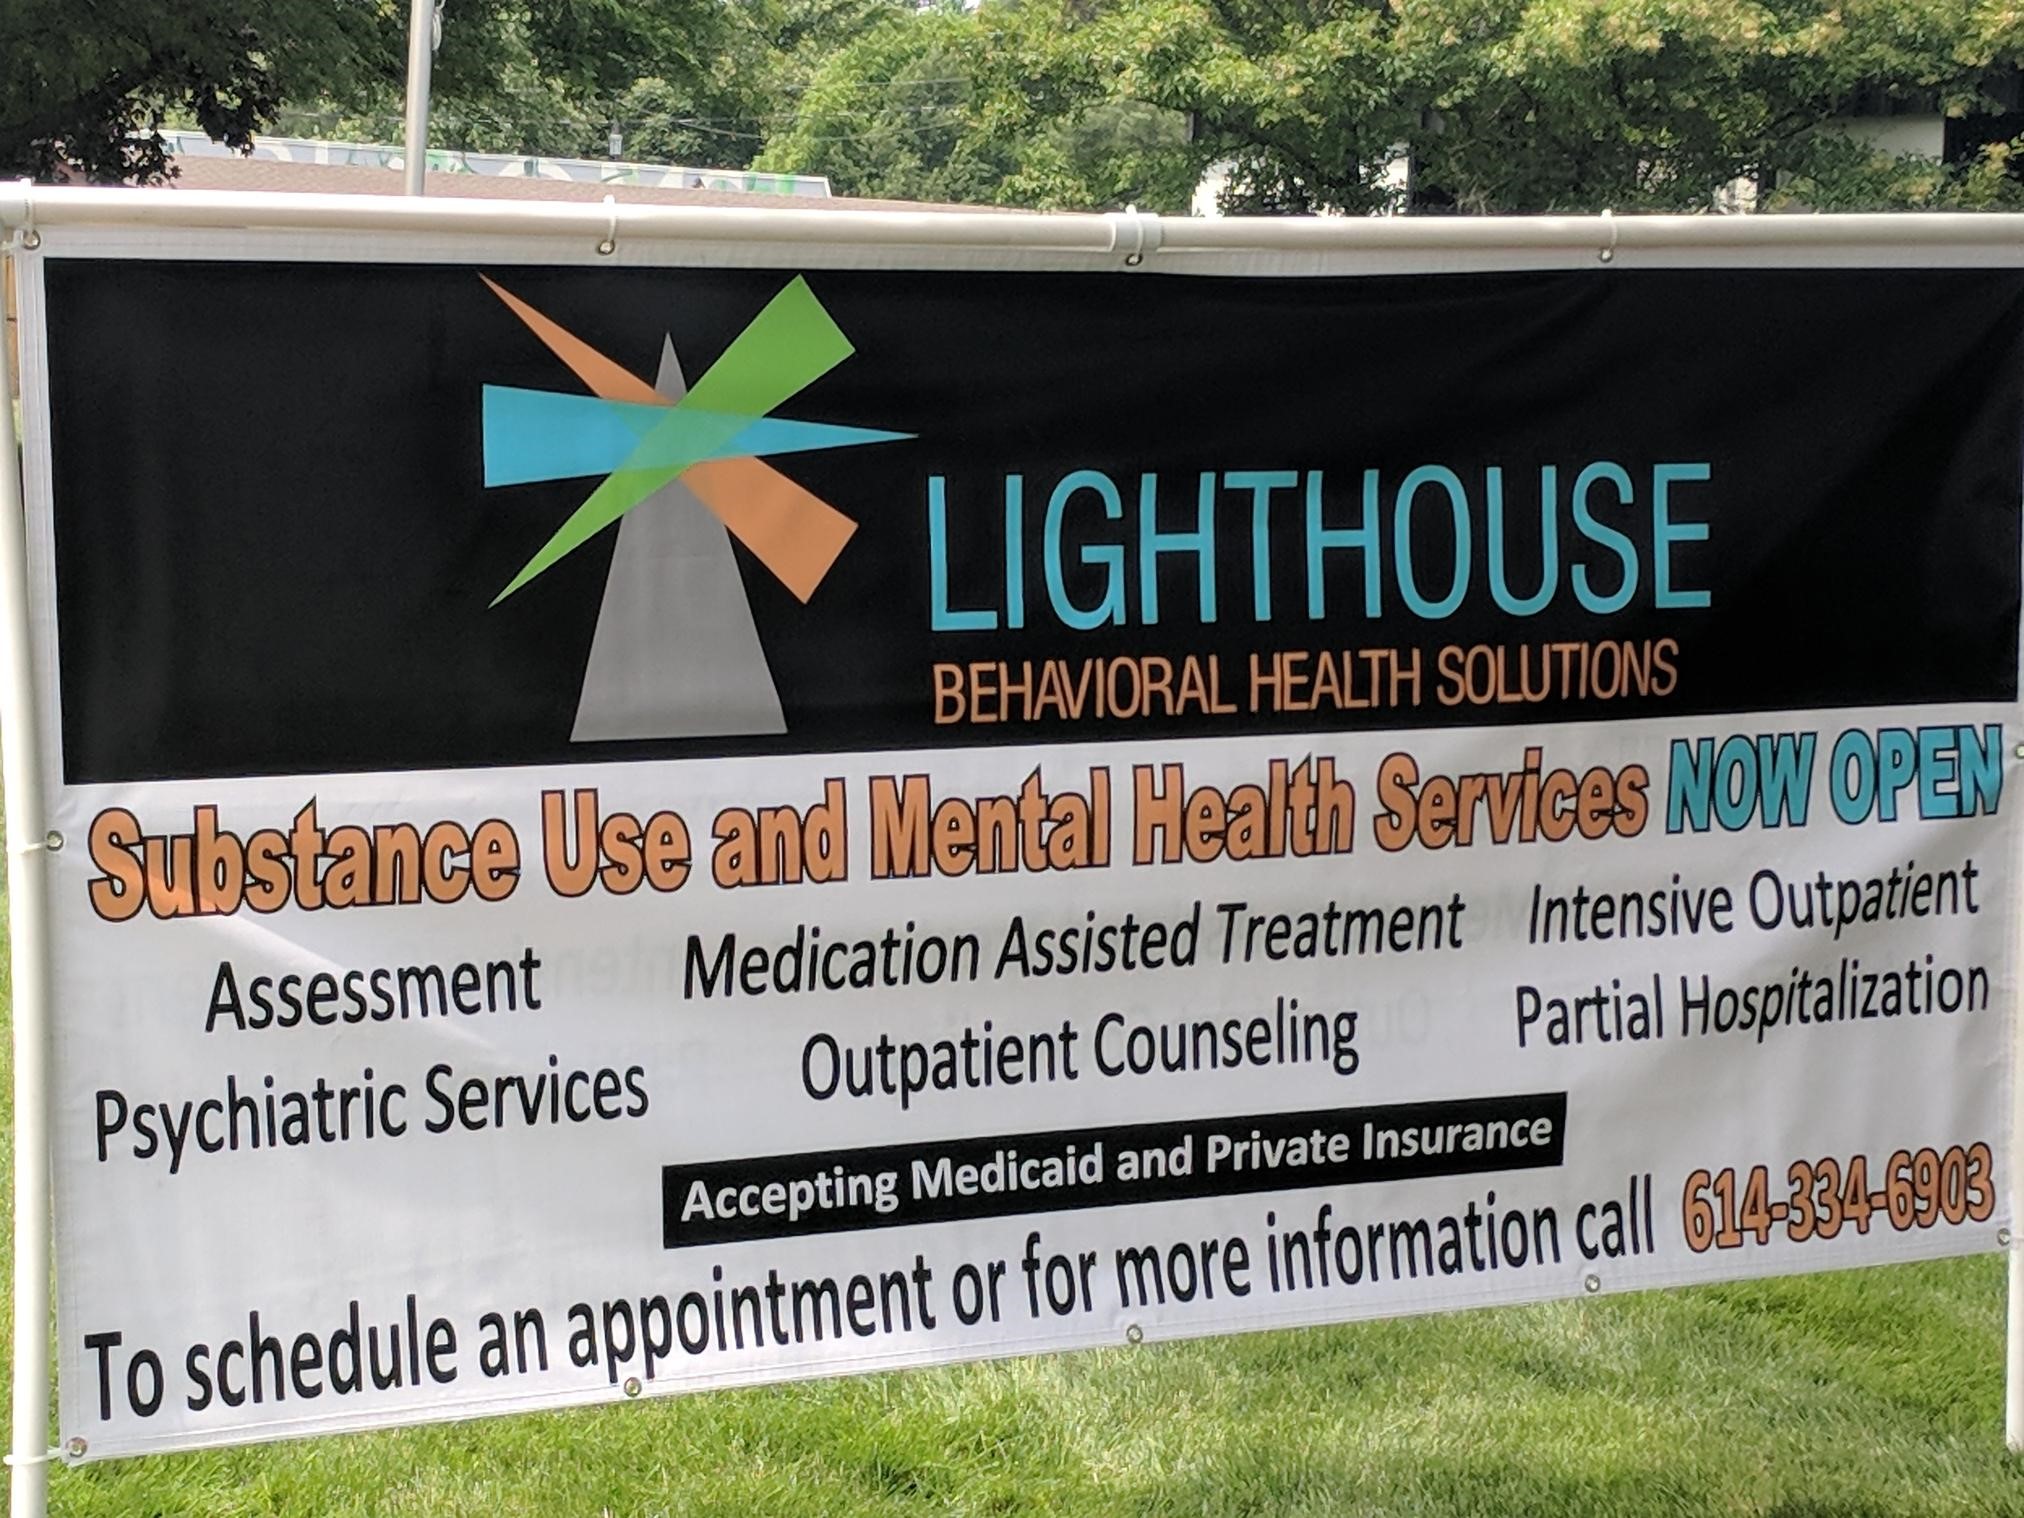 Lighthouse Behavioral Health Solutions Photo